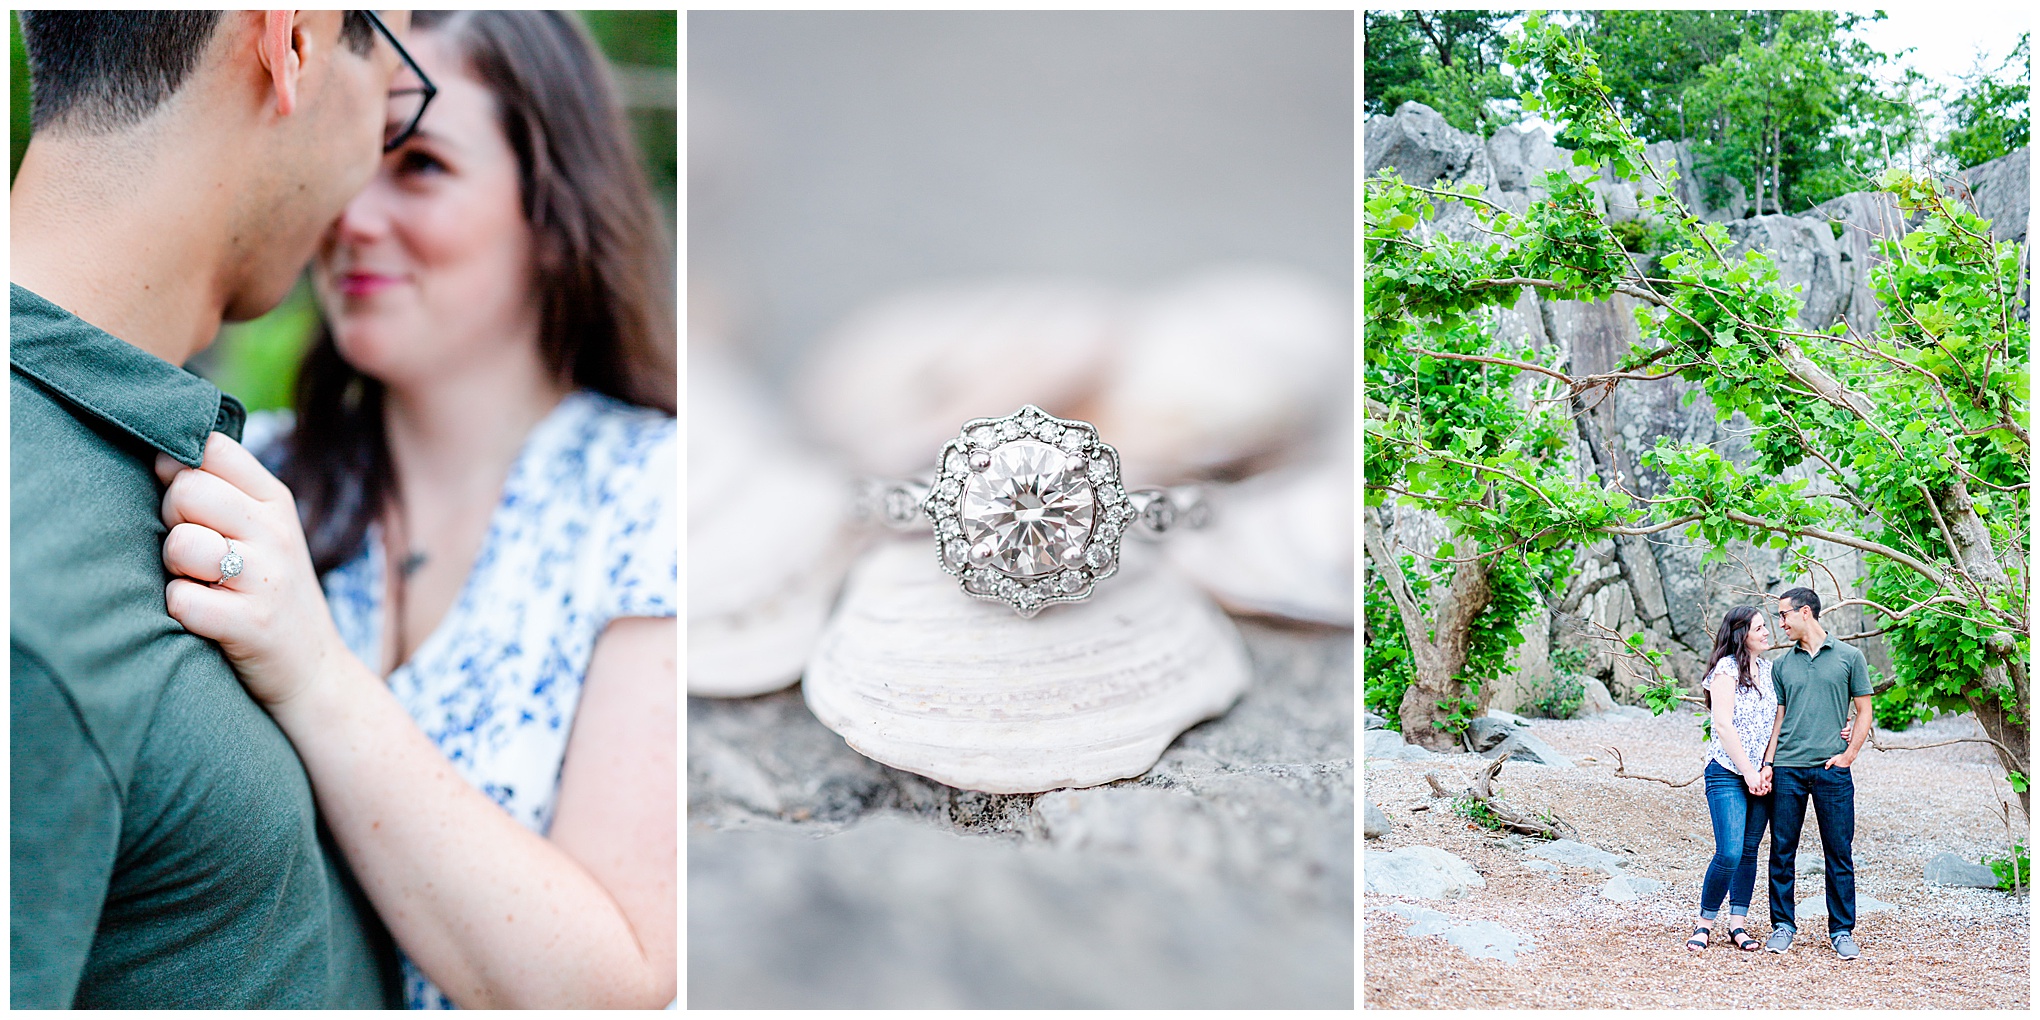 Great Falls Park engagement photos, Great Falls Park, Great Falls Virginia, national park, Great Falls, Great Falls engagement photos, Virginia engagement photos, Virginia engagement photographer, Rachel E.H. Photography, engaged couple, engagement session style, outdoorsy engagement photos, hiking engagement photos, beach engagement photos, diamond engagement ring